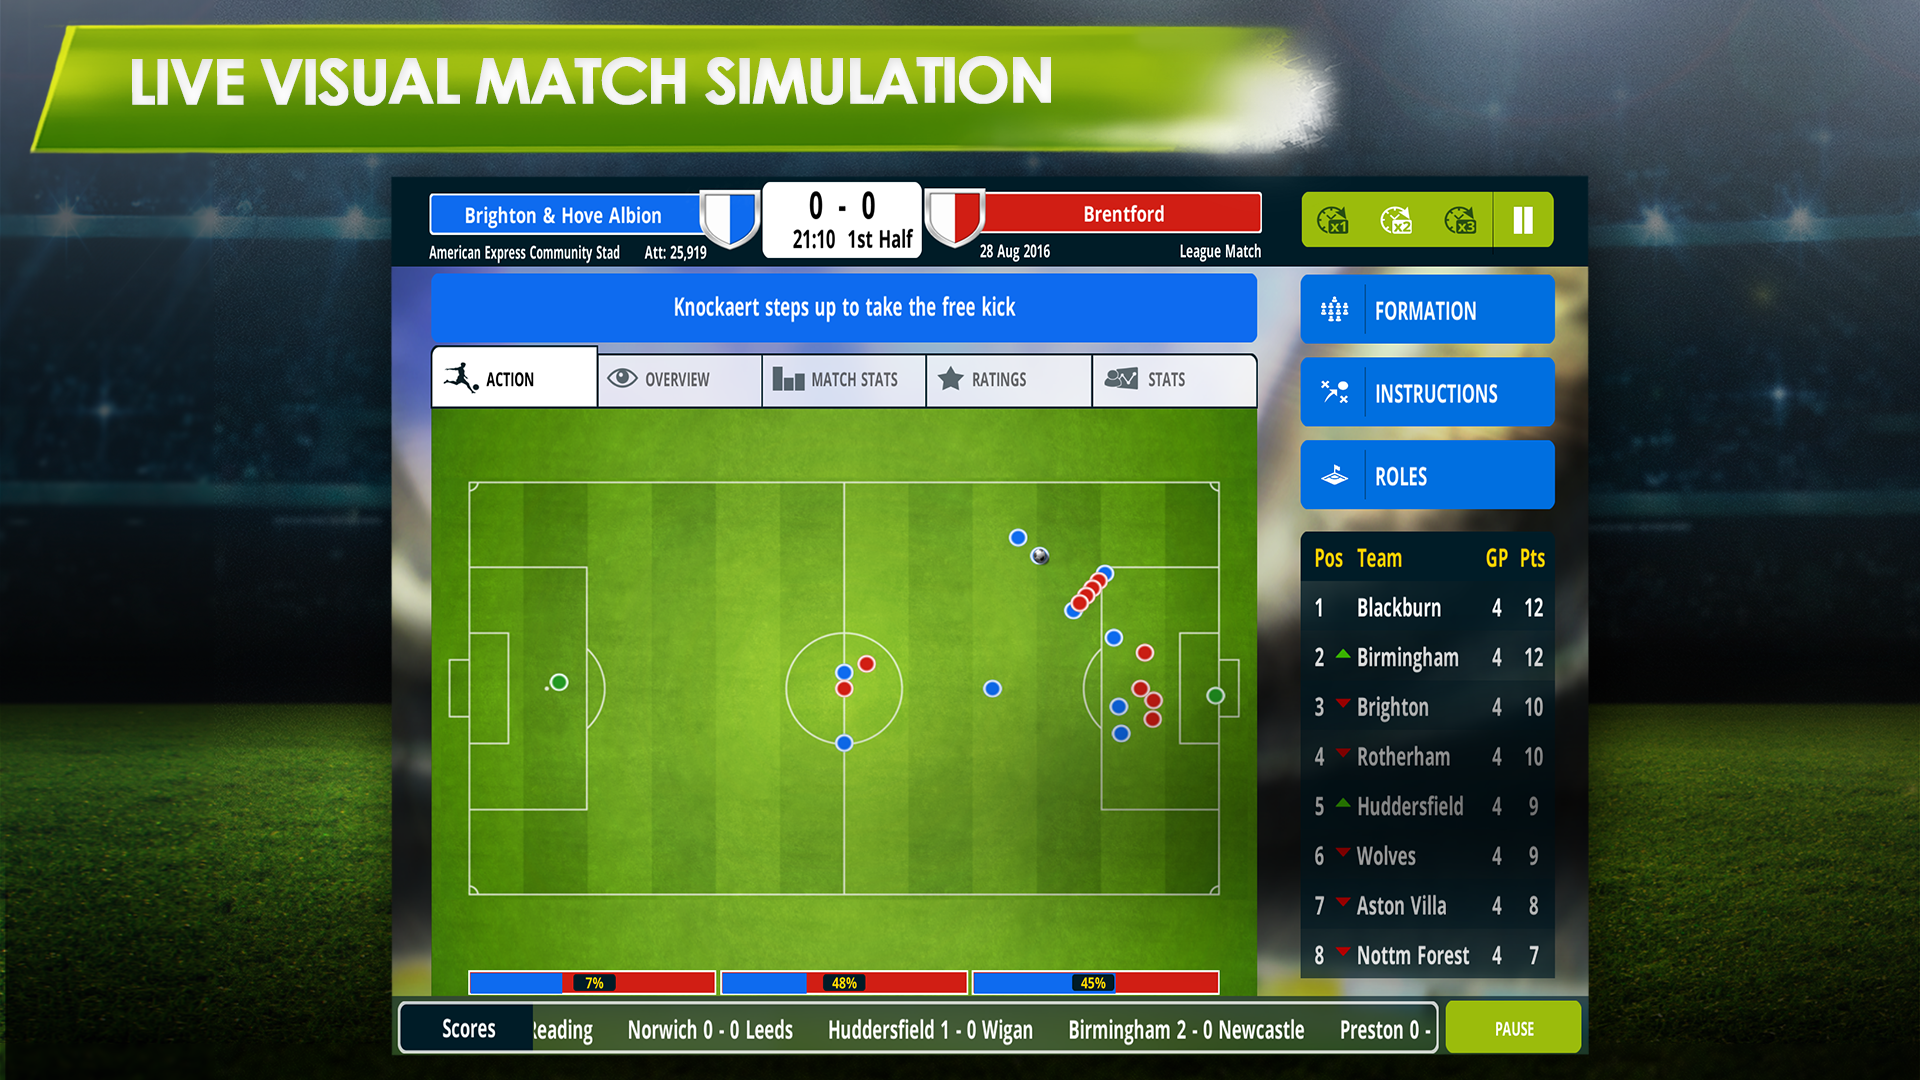 Championship Manager - Download